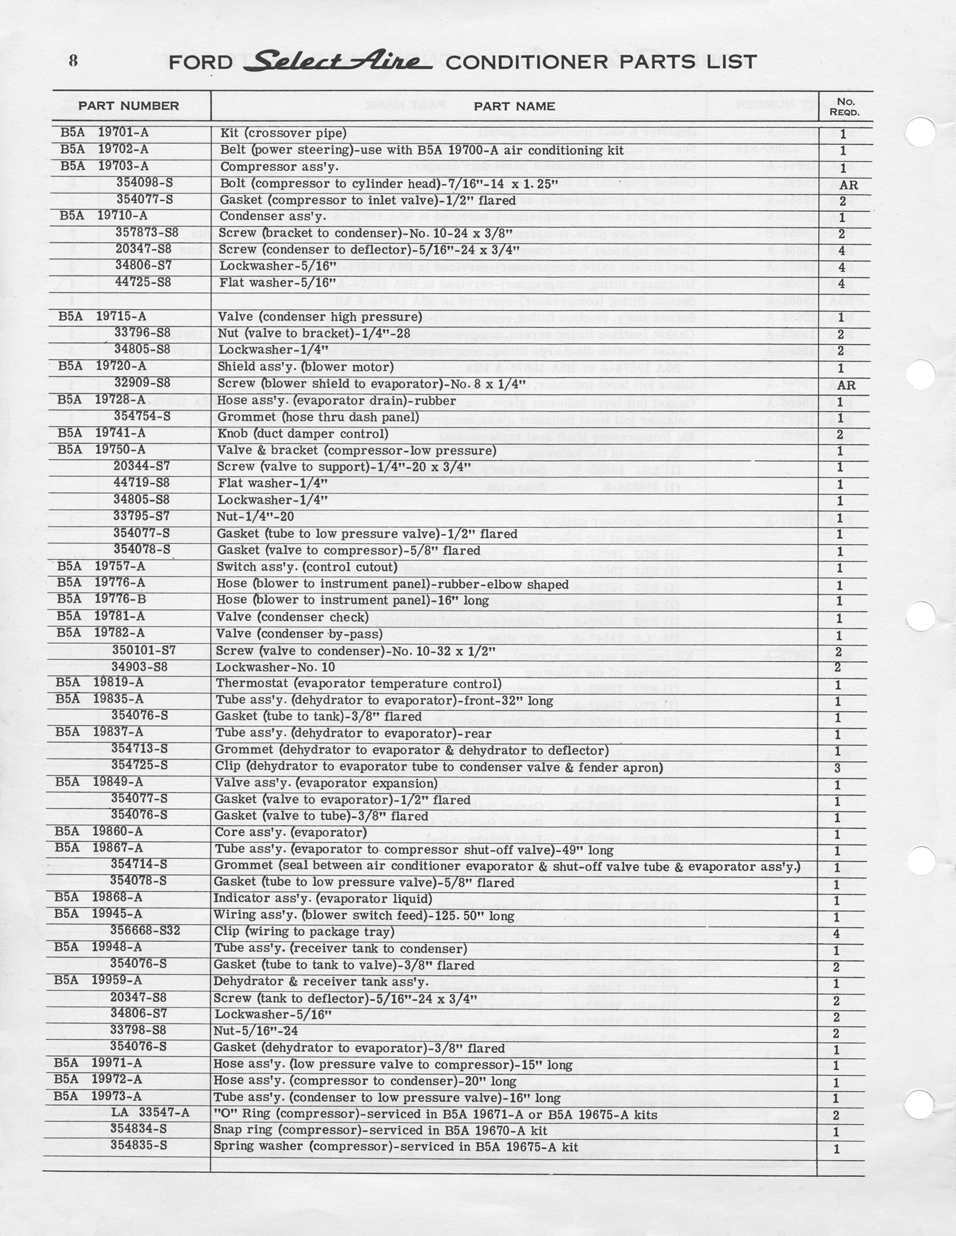 1955 Ford Car SelectAire Conditioner Parts List Page 8